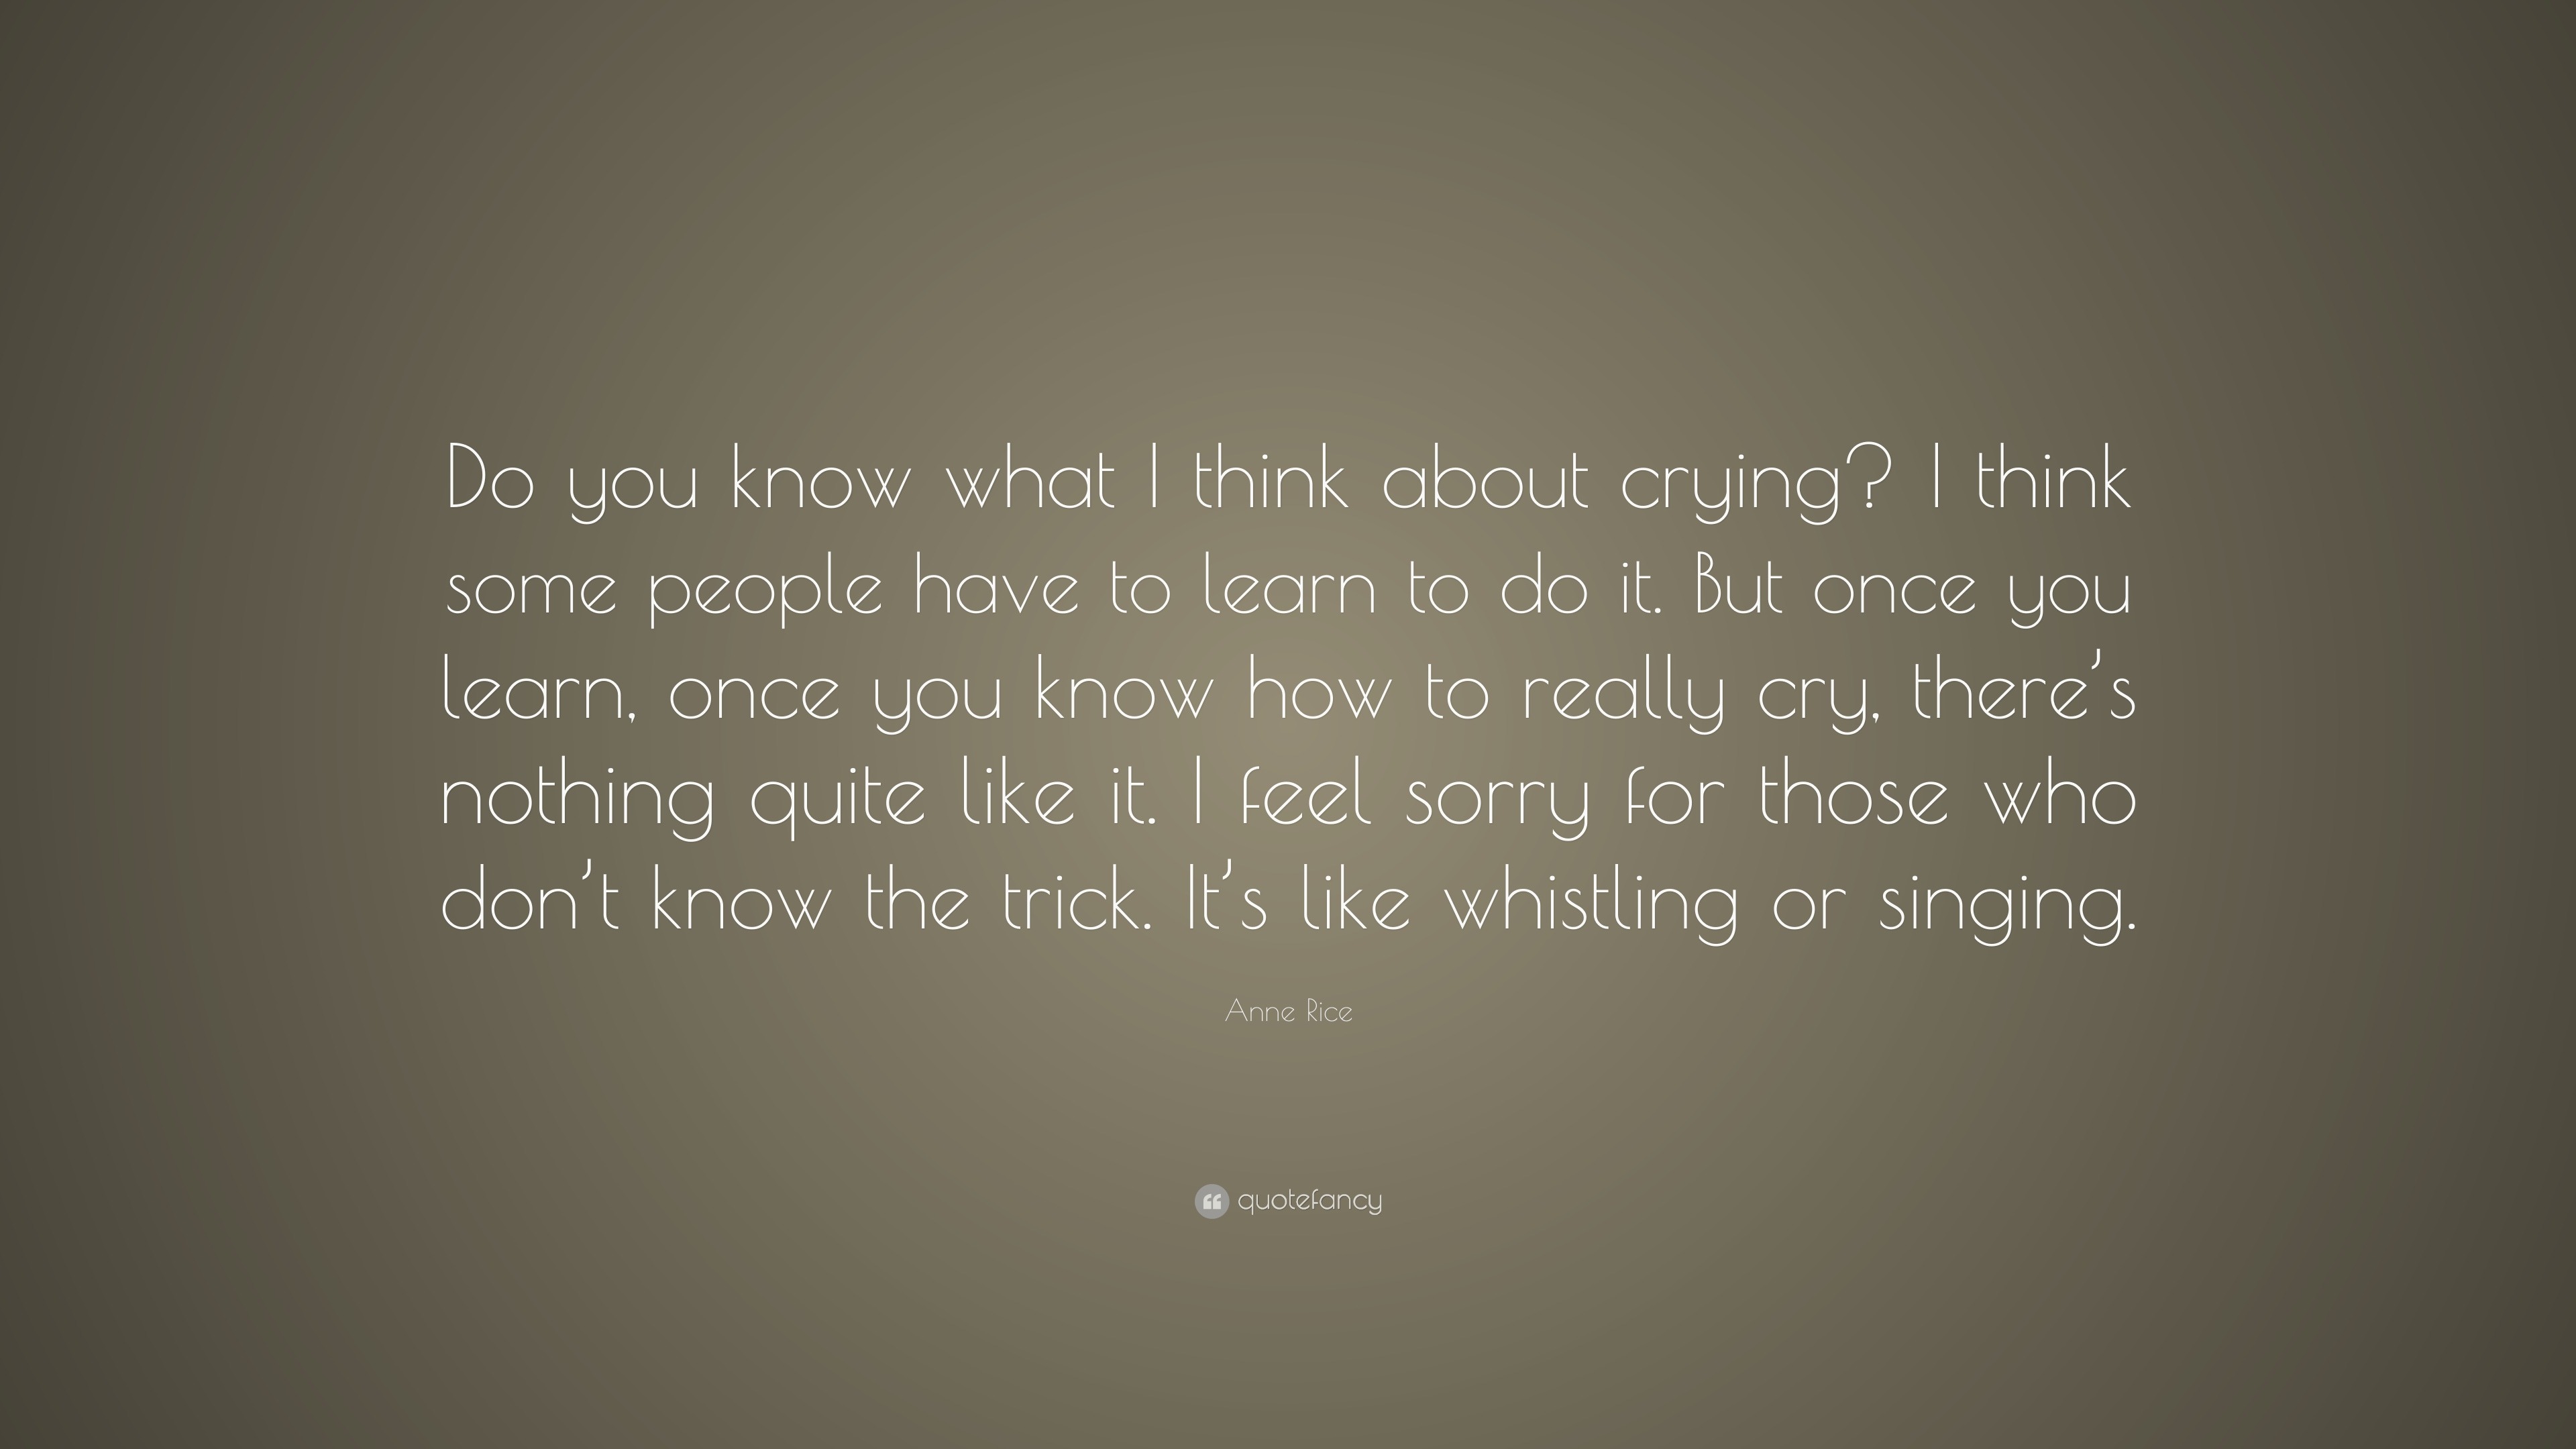 Anne Rice Quote Do You Know What I Think About Crying I Think Some People Have To Learn To Do It But Once You Learn Once You Know How